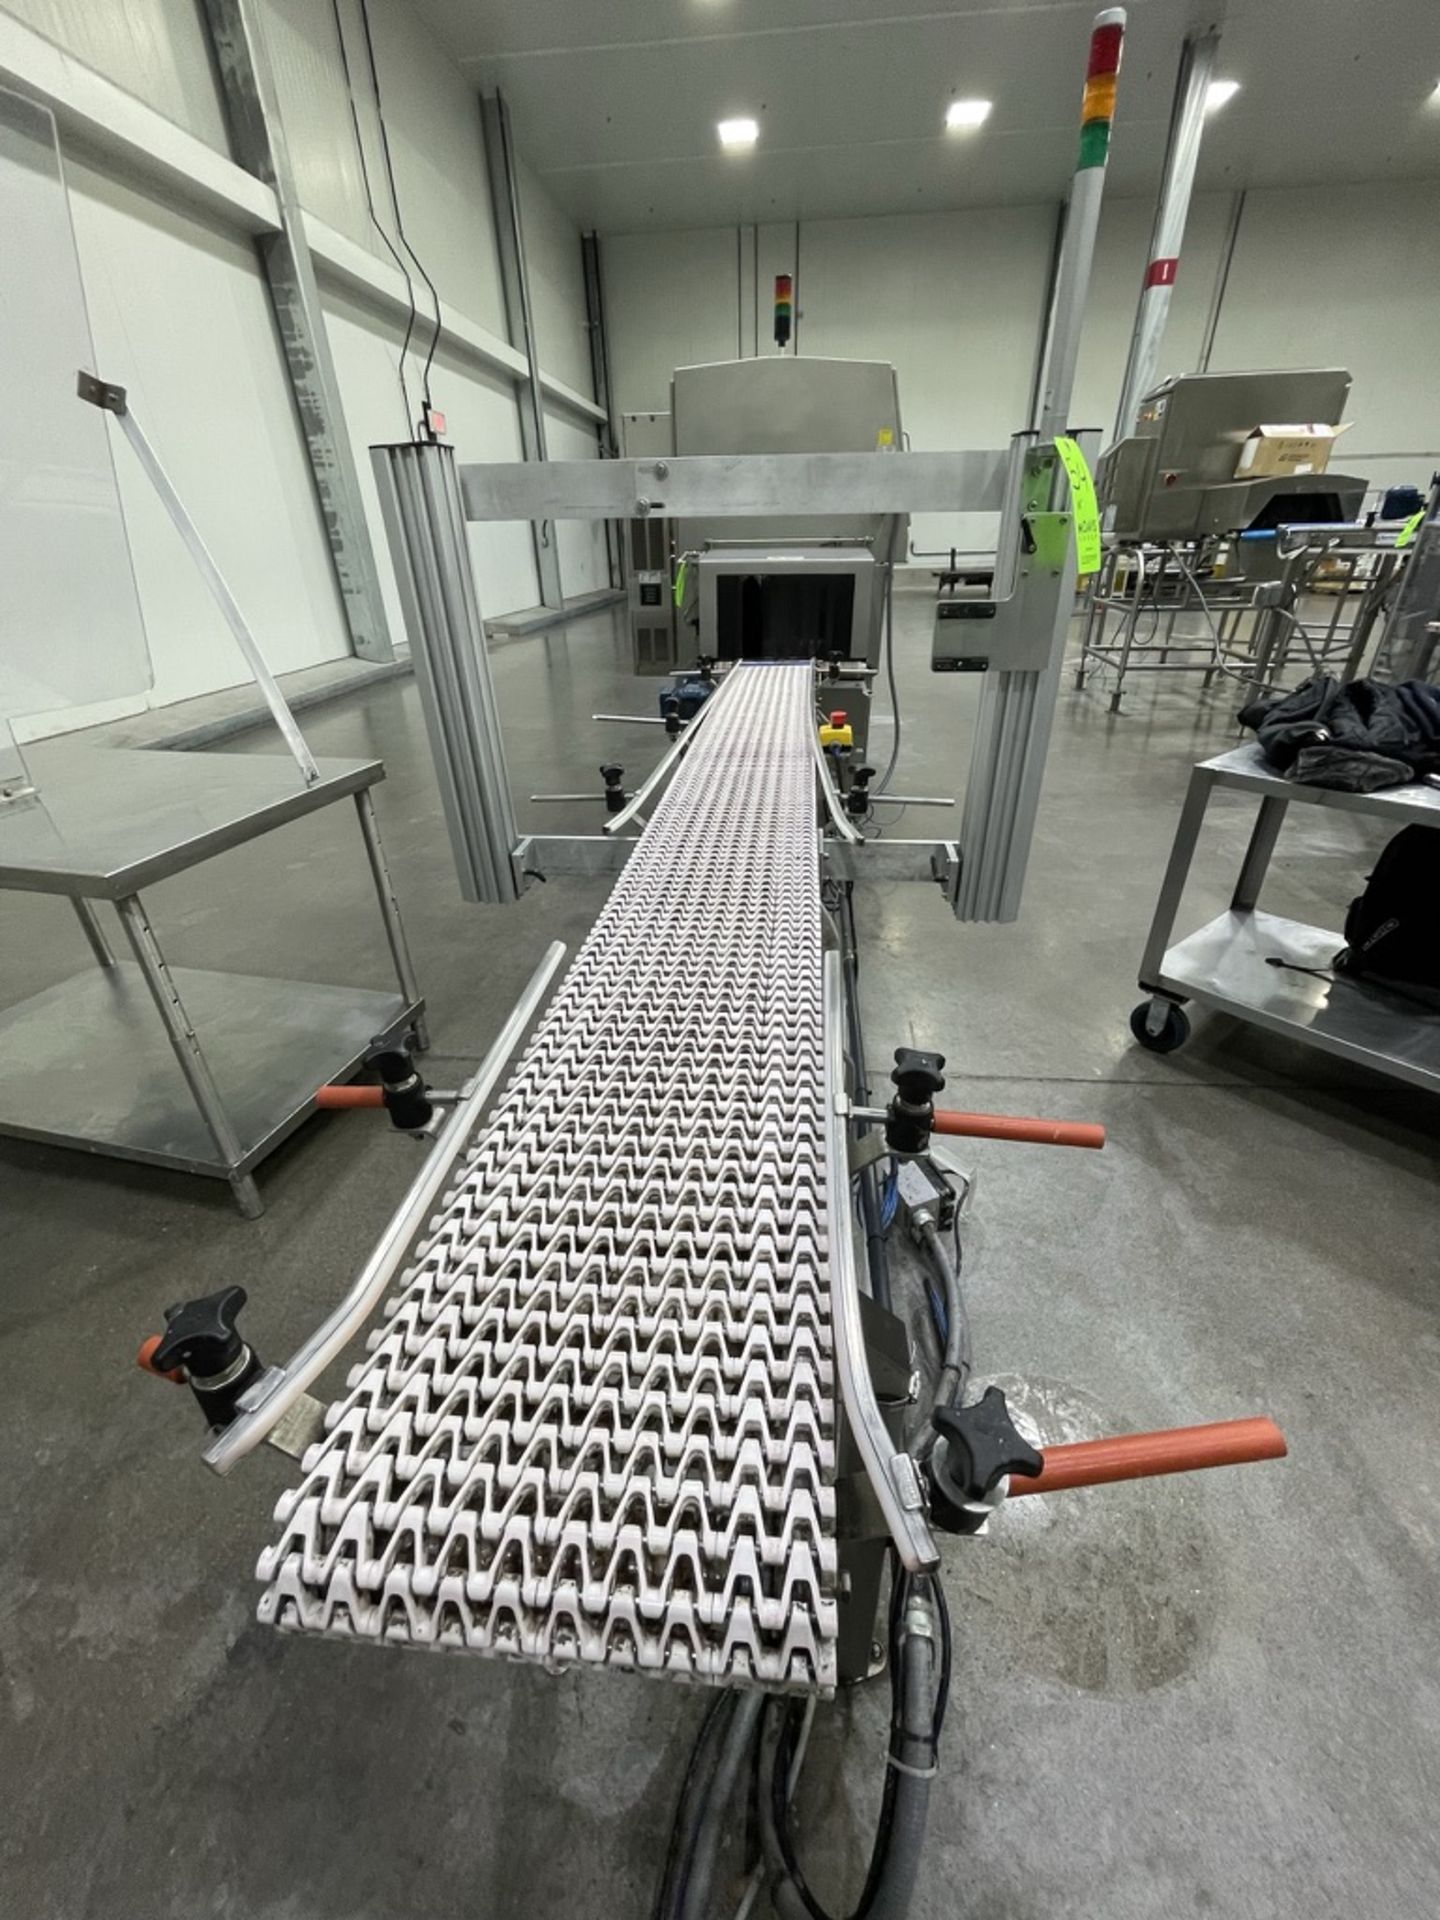 SPANTECH 10' X 12"" W CONVEYOR(INV#84339)(Located @ the MDG Auction Showroom 2.0 in Monroeville, PA) - Image 3 of 4